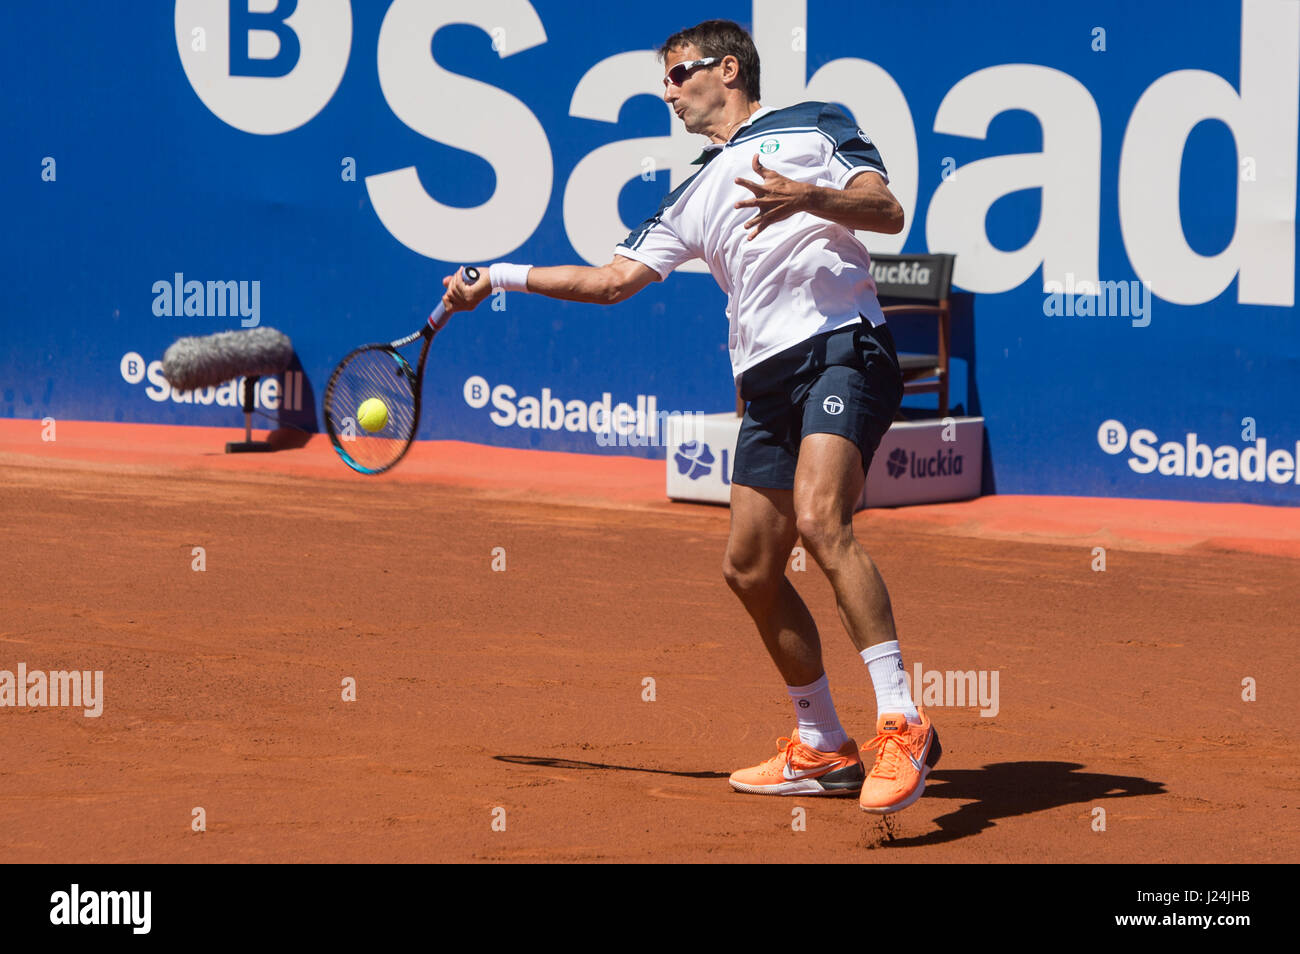 Barcelona, Spain. 25th April, 2017. Spanish tennis player Tommy Robredo during a first round game against Yuichi Sugita at "Barcelona Open Banc Sabadell - Trofeo Conde de Godó". Credit: David Grau/Alamy Live News. Stock Photo